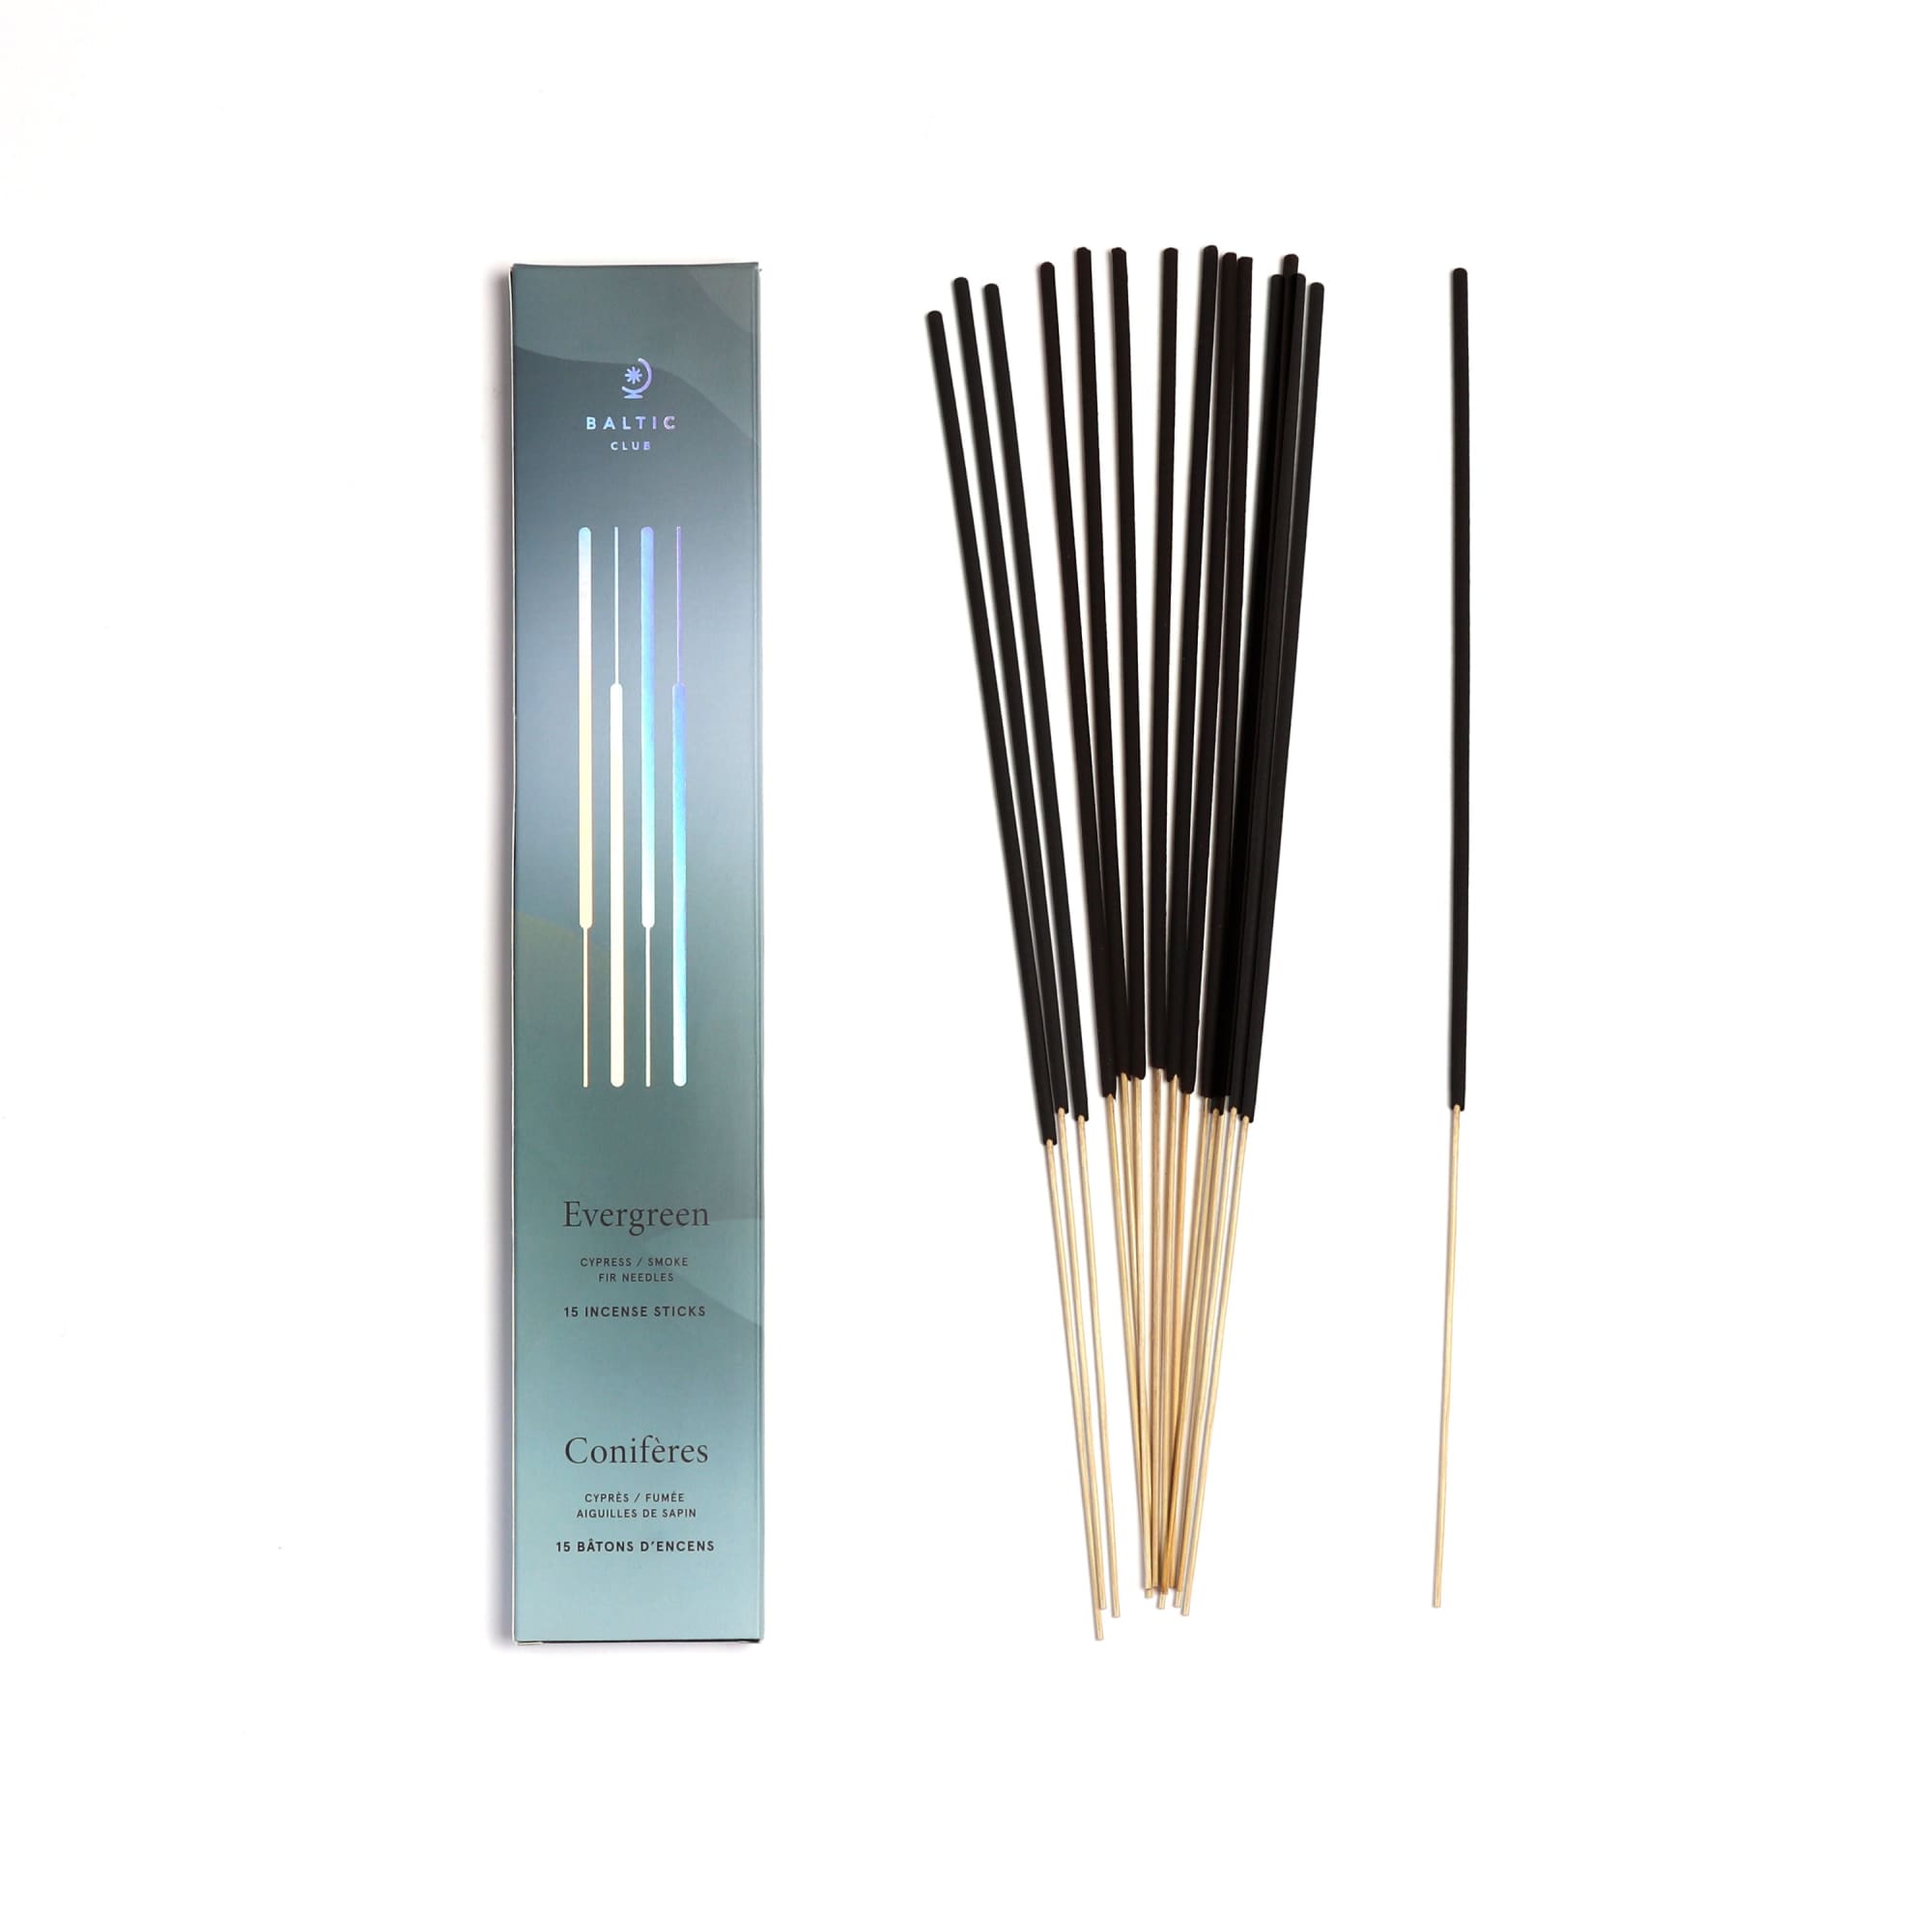 Evergreen Incense Sticks box of 15, seen from above